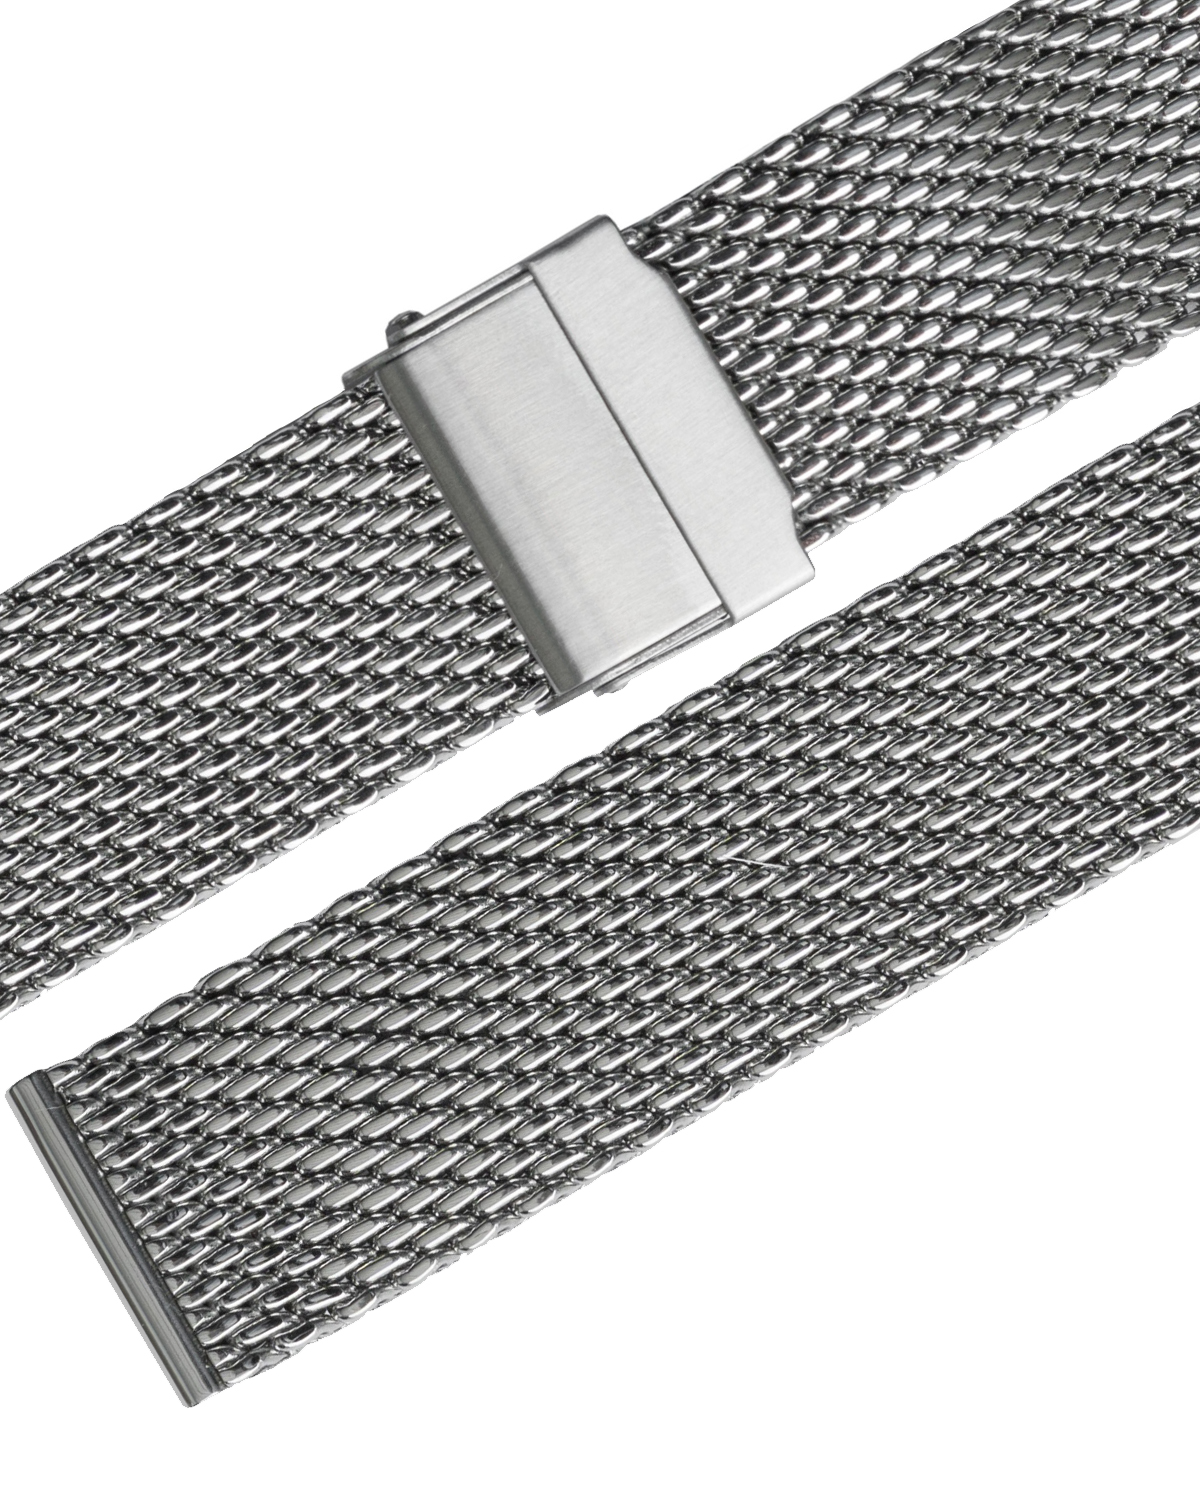 70-78068 Stalux Milanaise mesh 24mm stainless steel